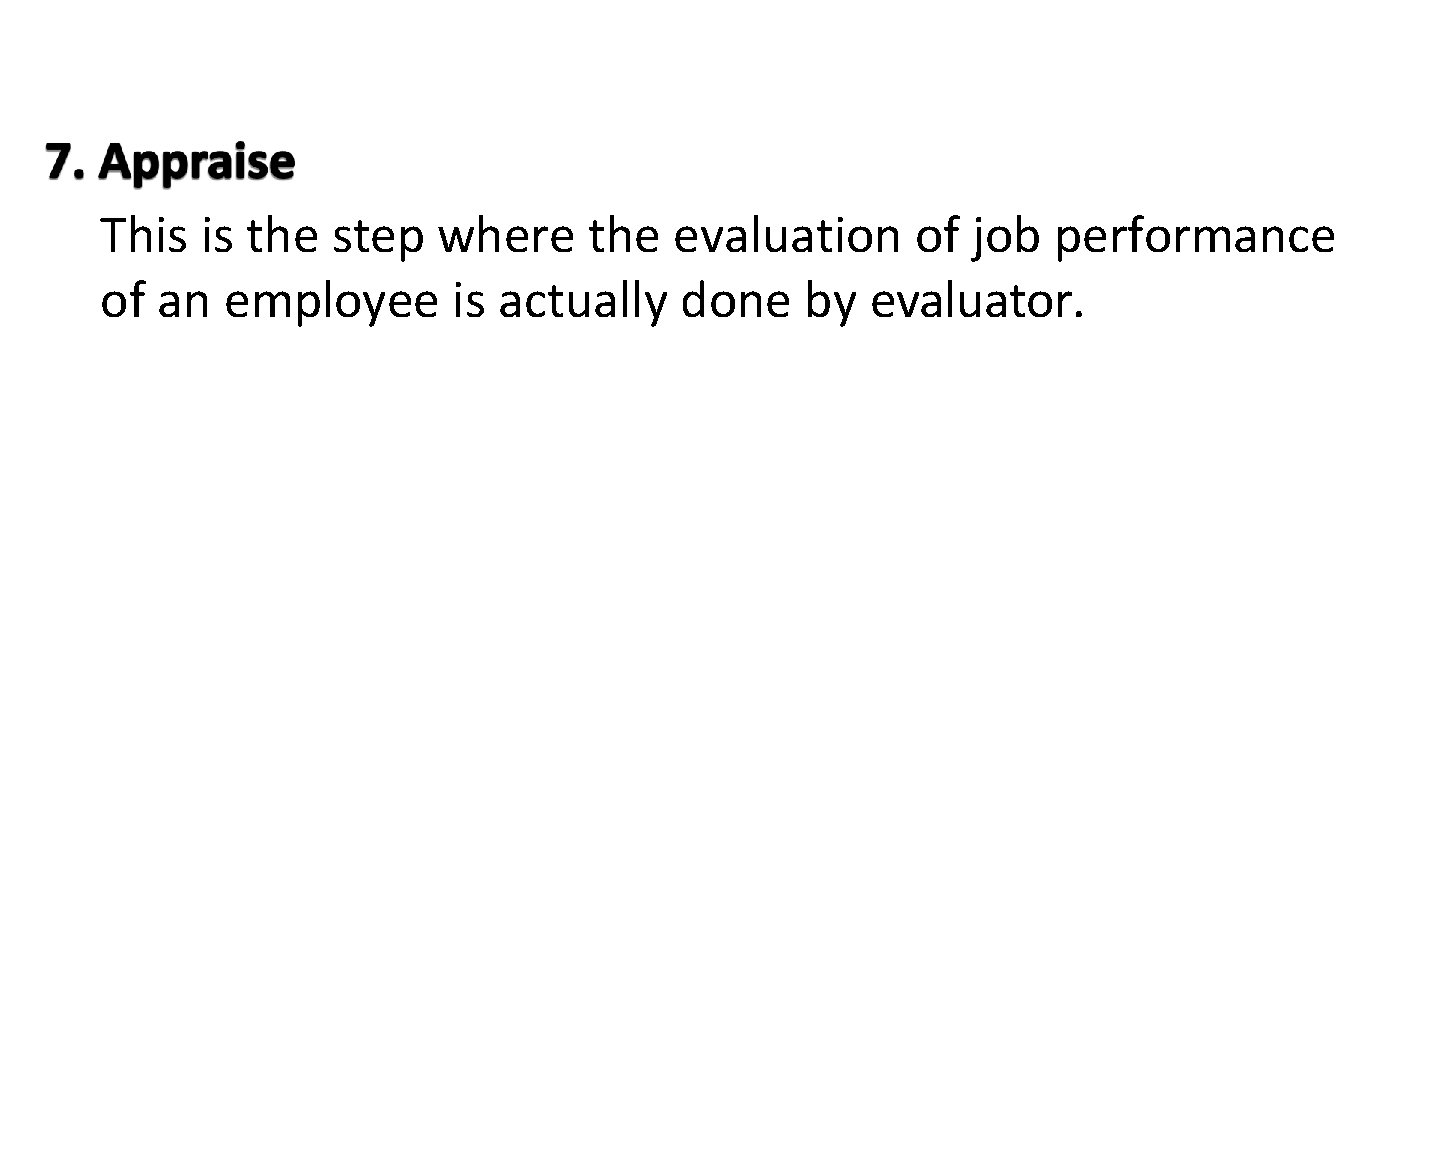 This is the step where the evaluation of job performance of an employee is